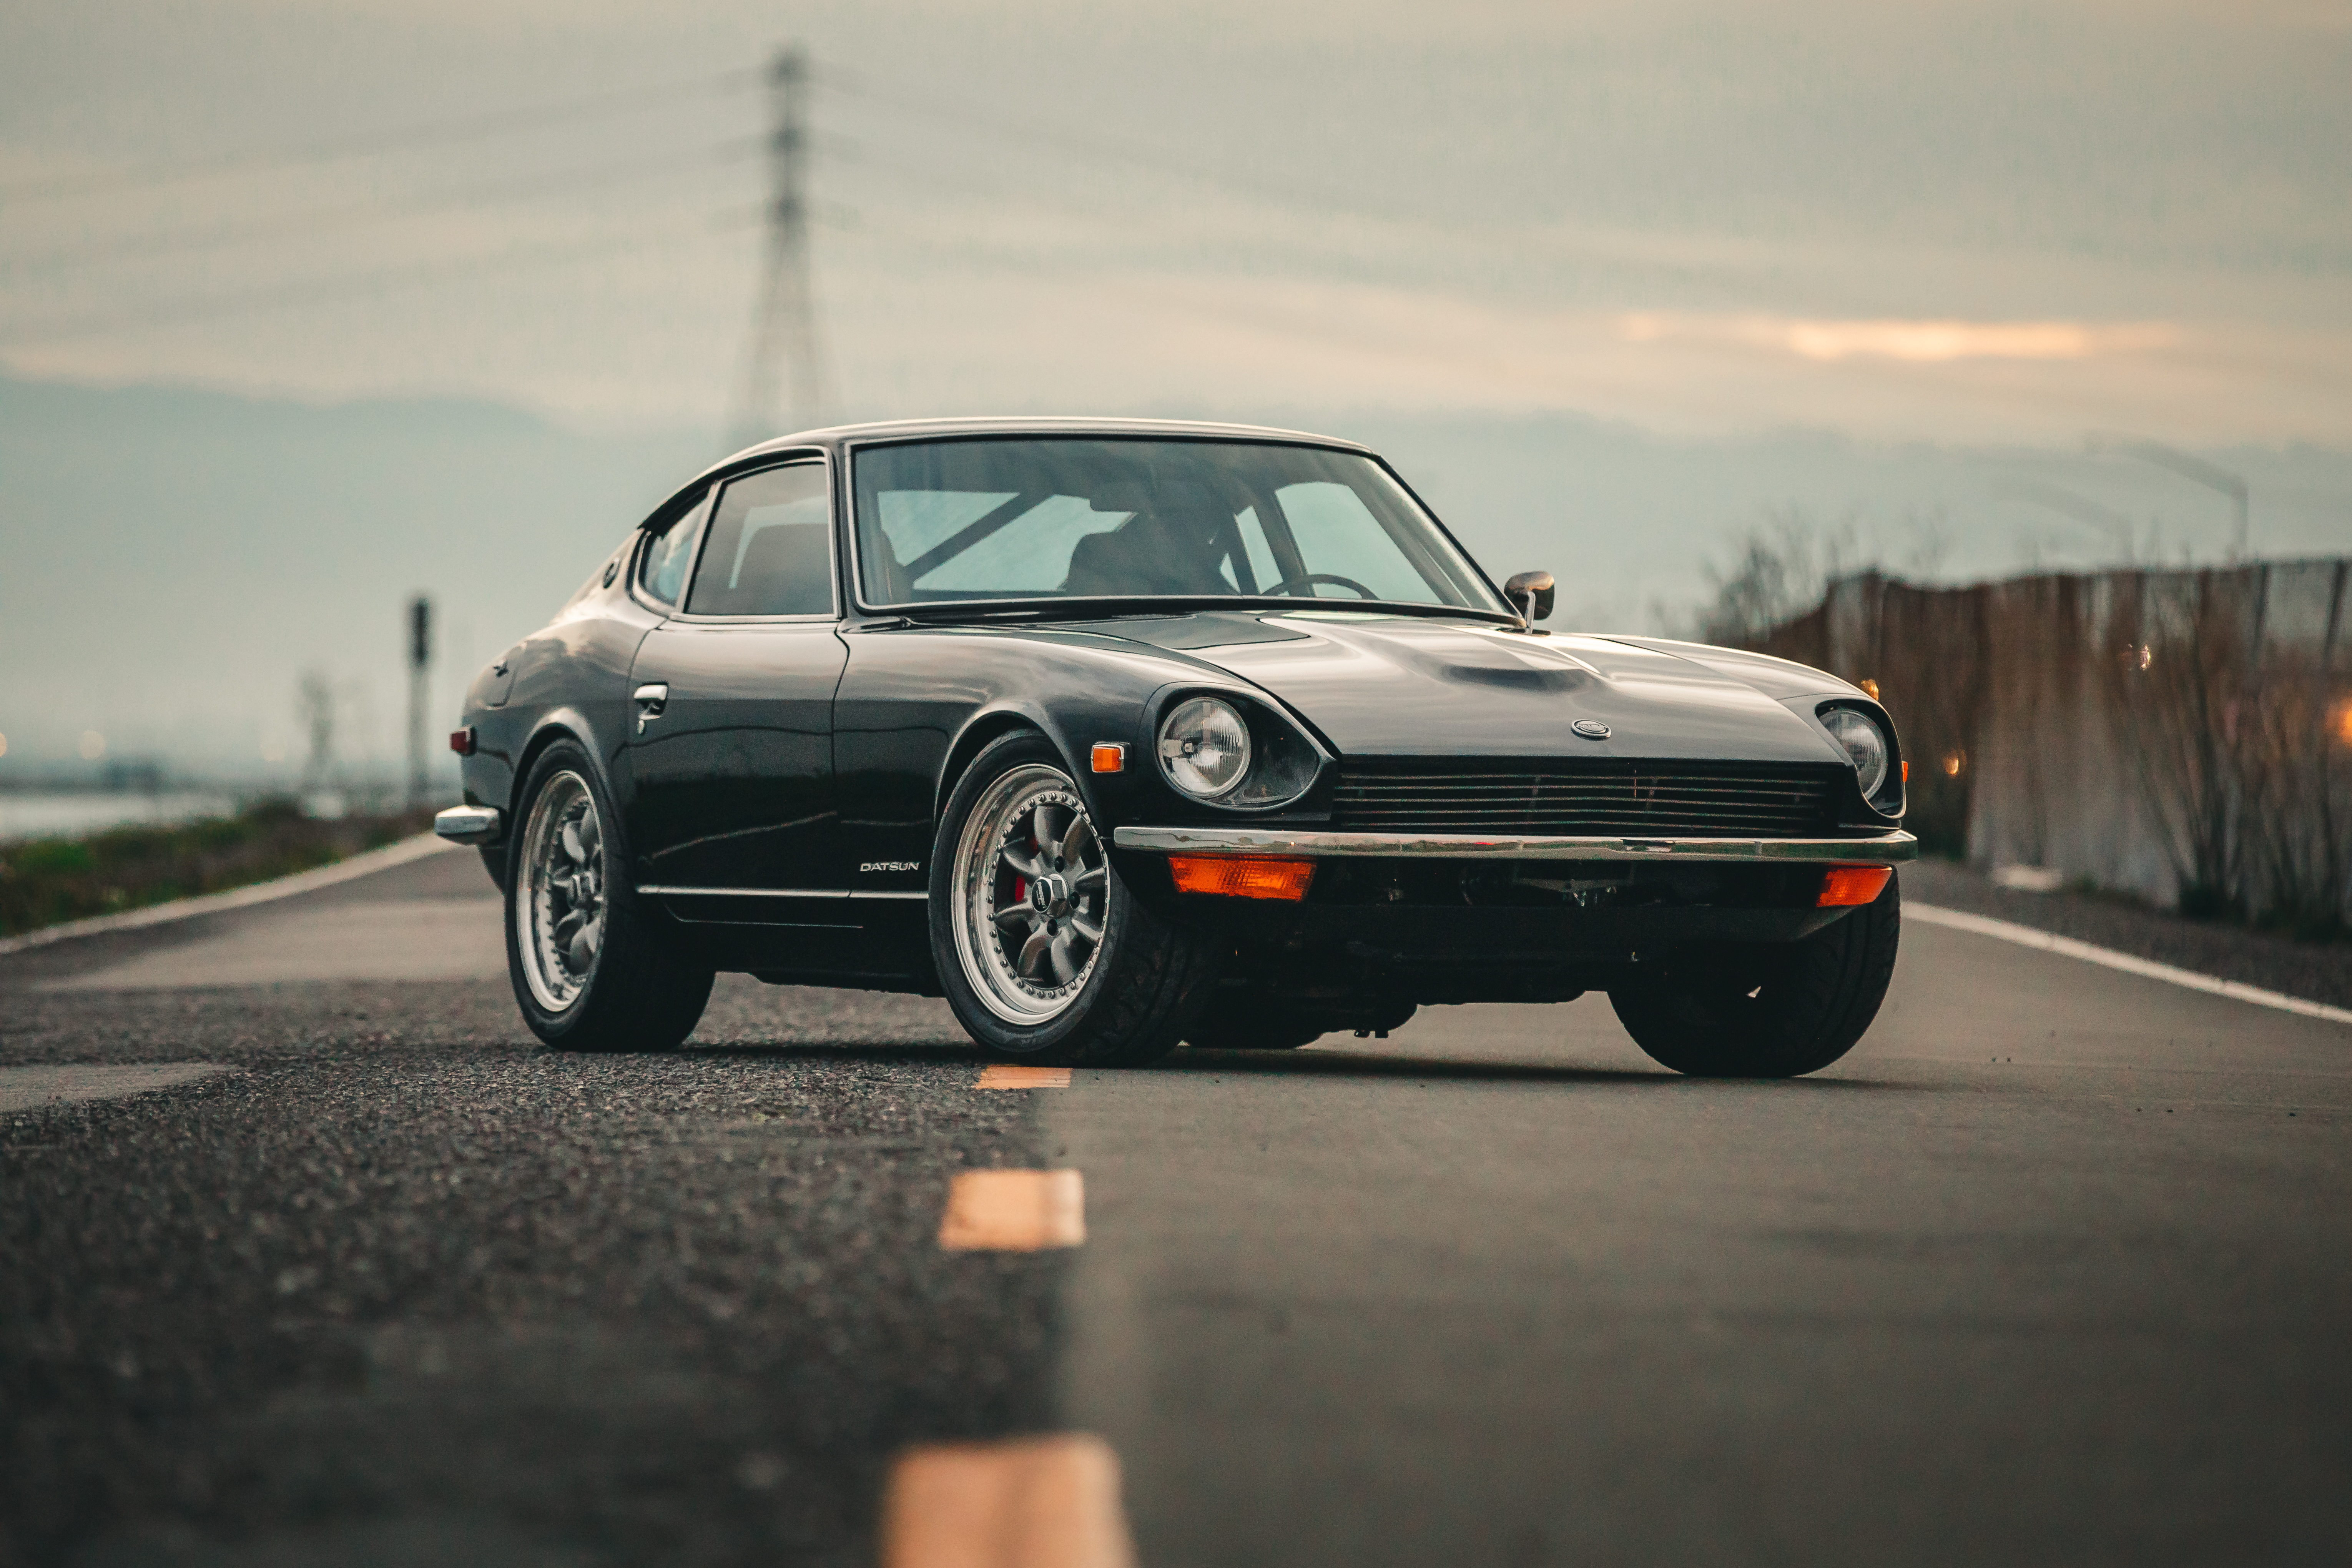 Meet Behemoth, the ultimate expression of a 240Z